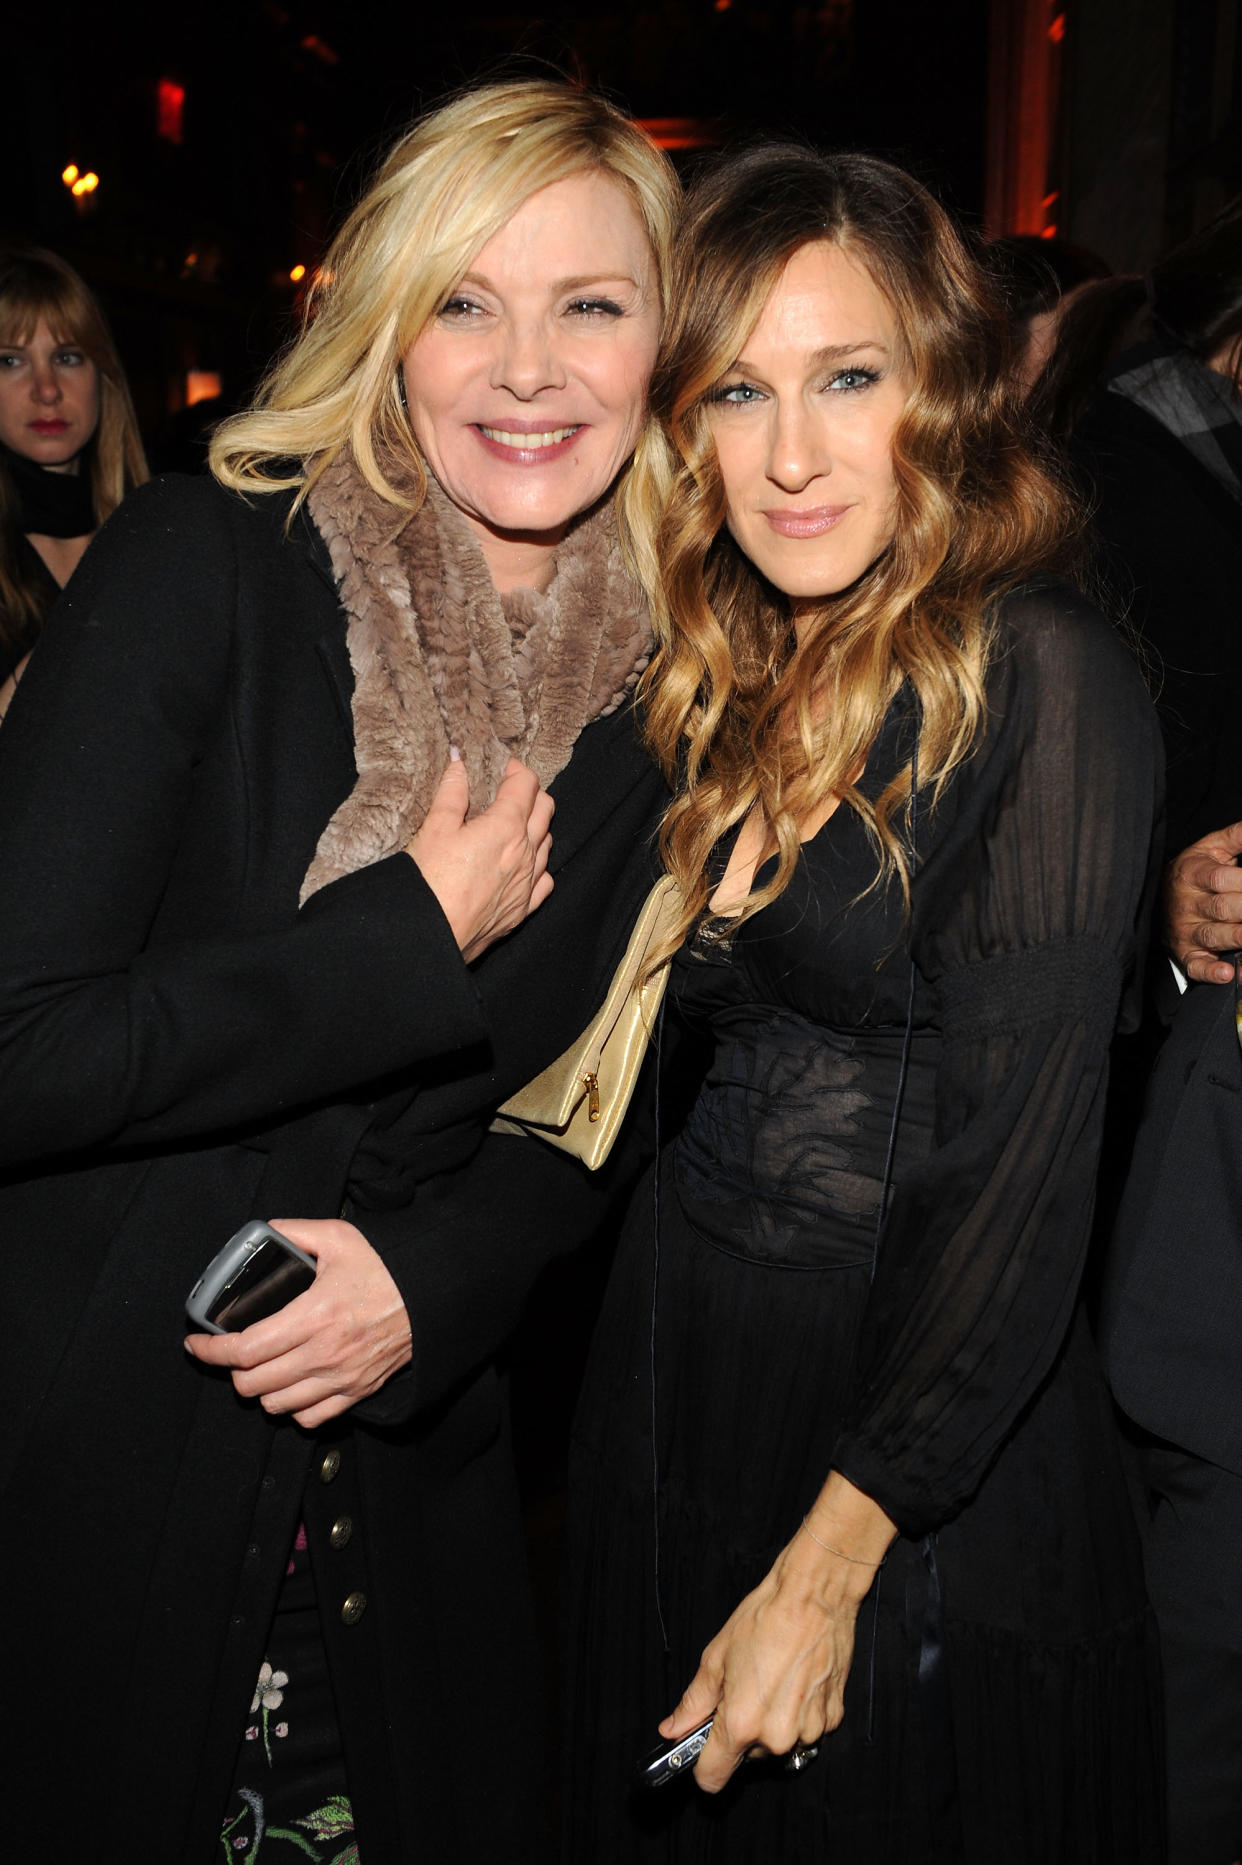 NEW YORK - DECEMBER 14:  Actors Kim Cattrall and Sarah Jessica Parker attend the premiere of 